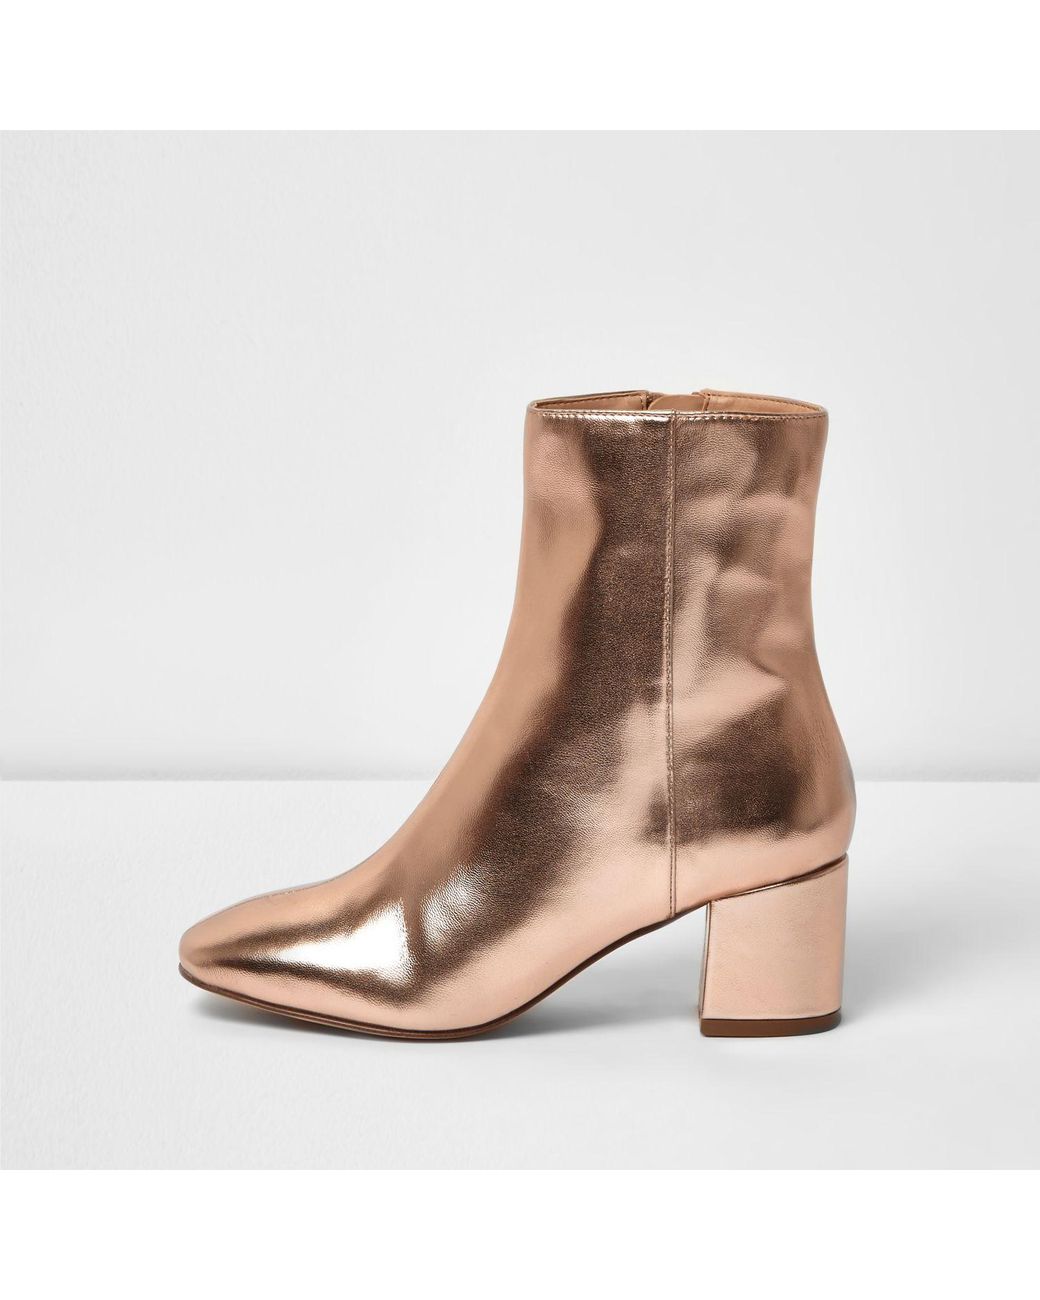 River Island Rose Gold Block Heel Ankle Boot in Brown | Lyst UK